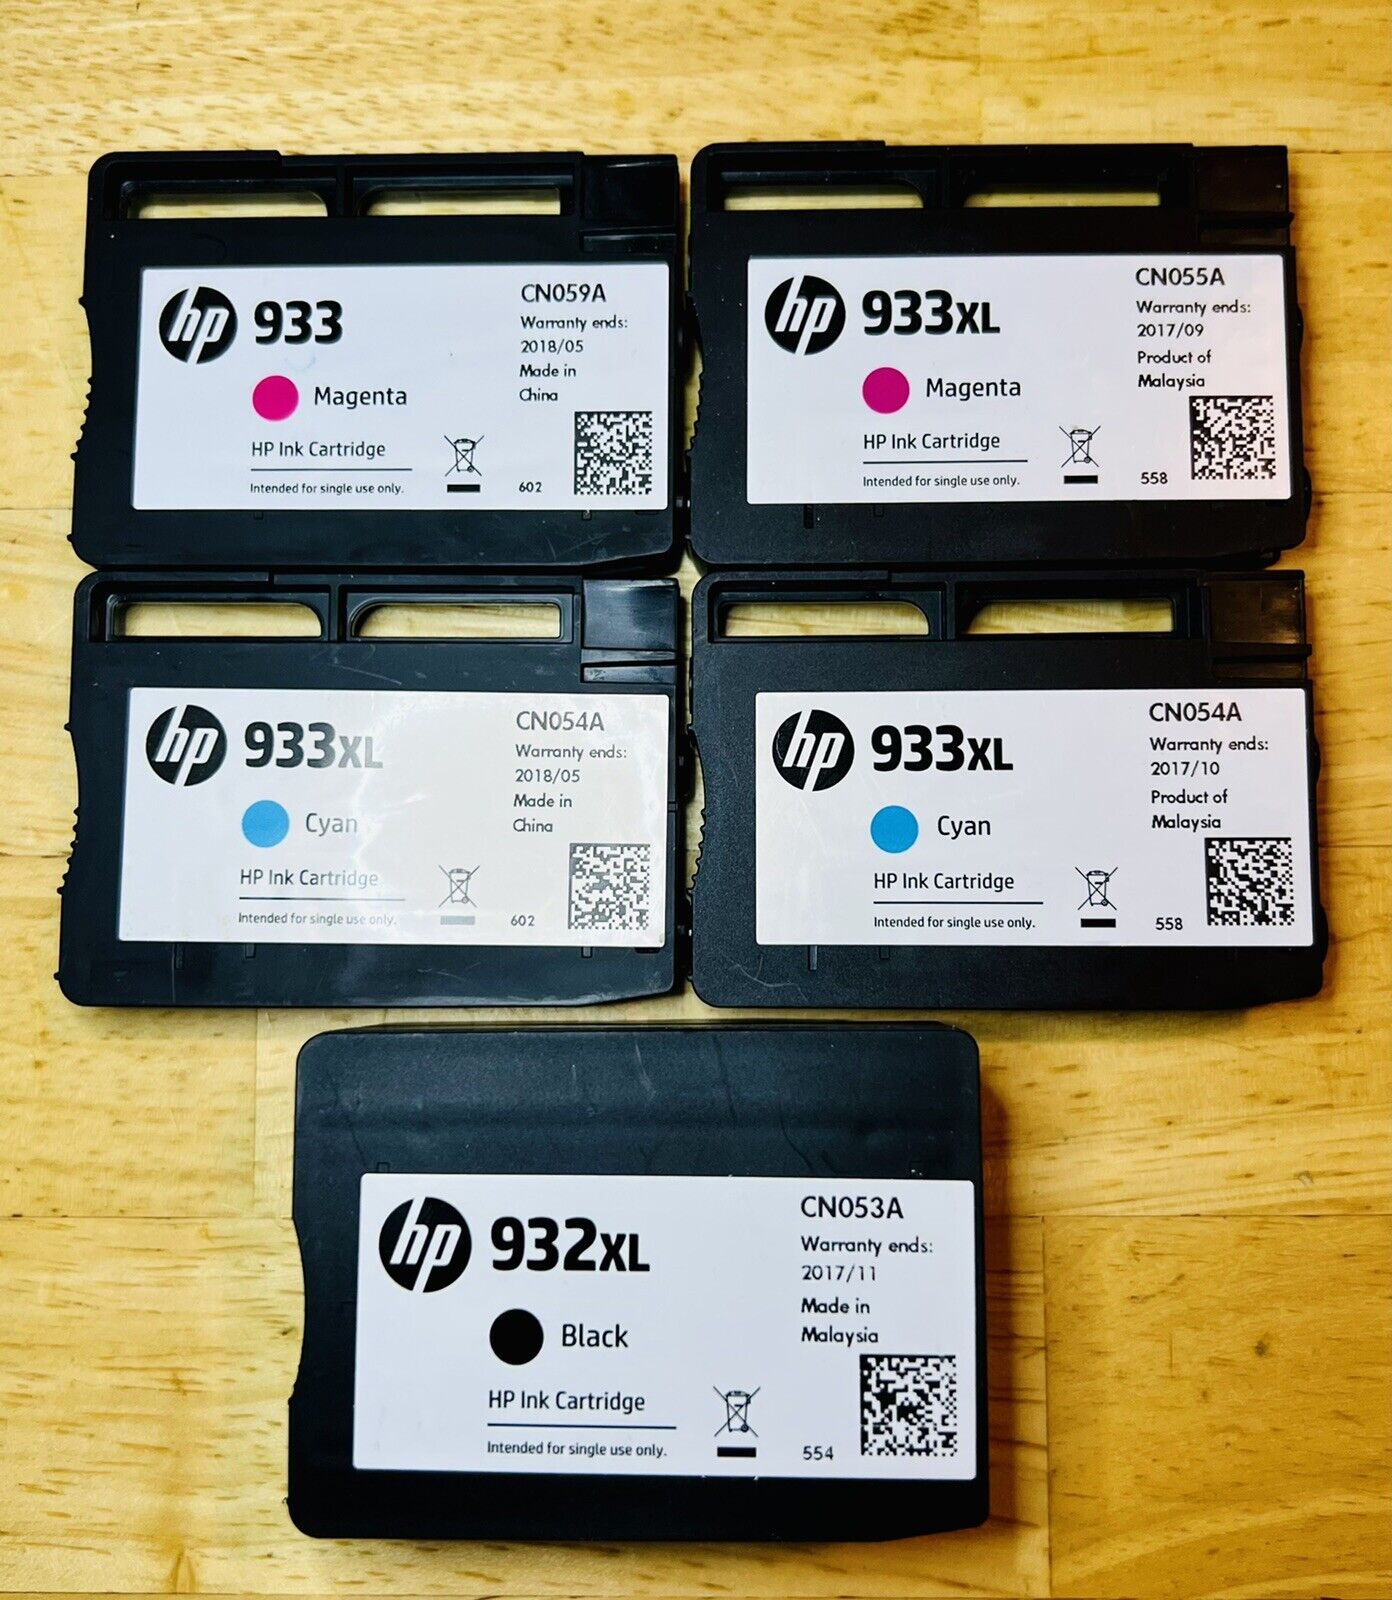 HP Partially and or Used 933 empty printer cartridges READ